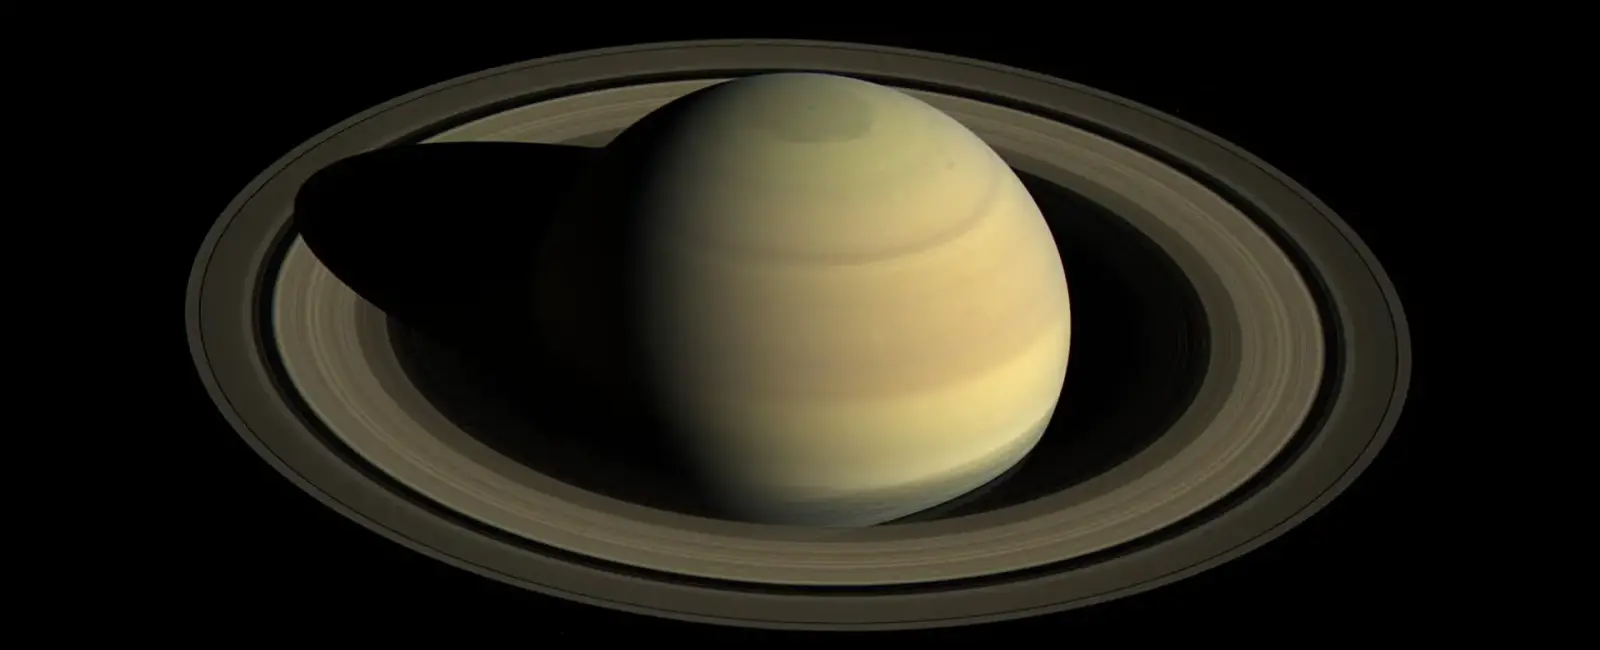 Saturn will likely lose its rings in approximately 100 million years because saturn s gravity pulls them in and turns them into a dusty icy rain